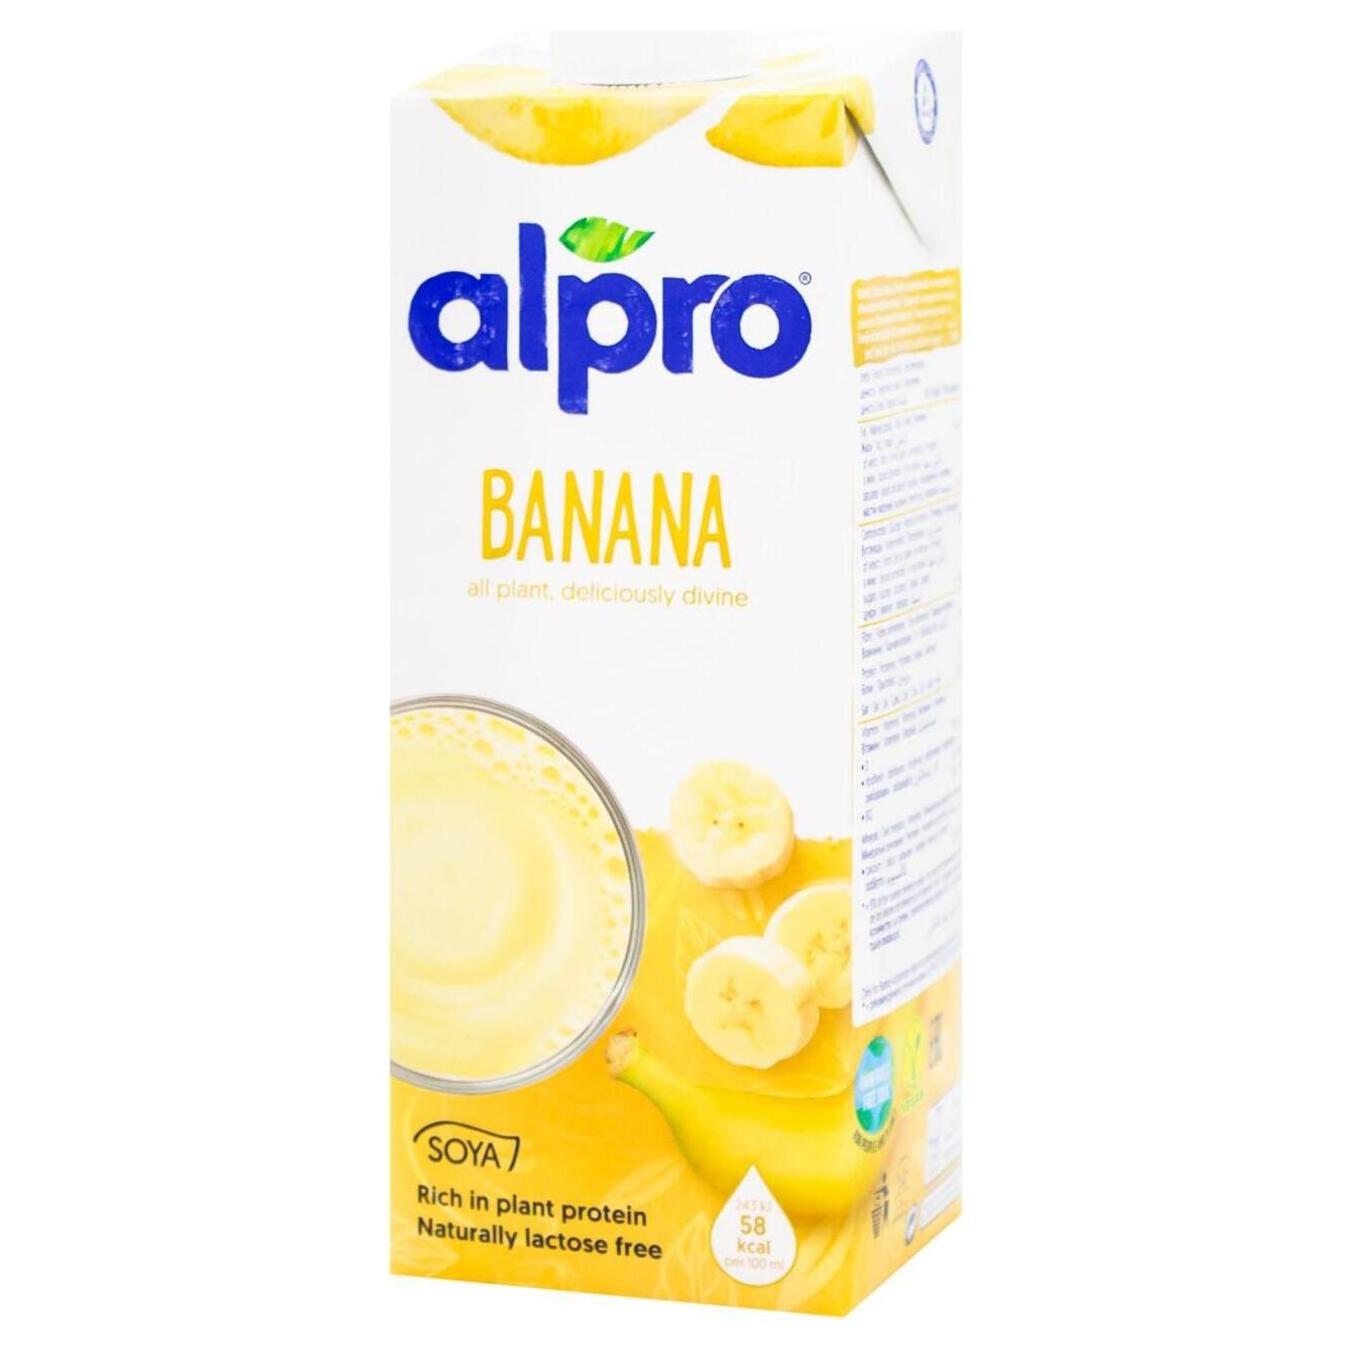 Soy drink Alpro banana 1kg package